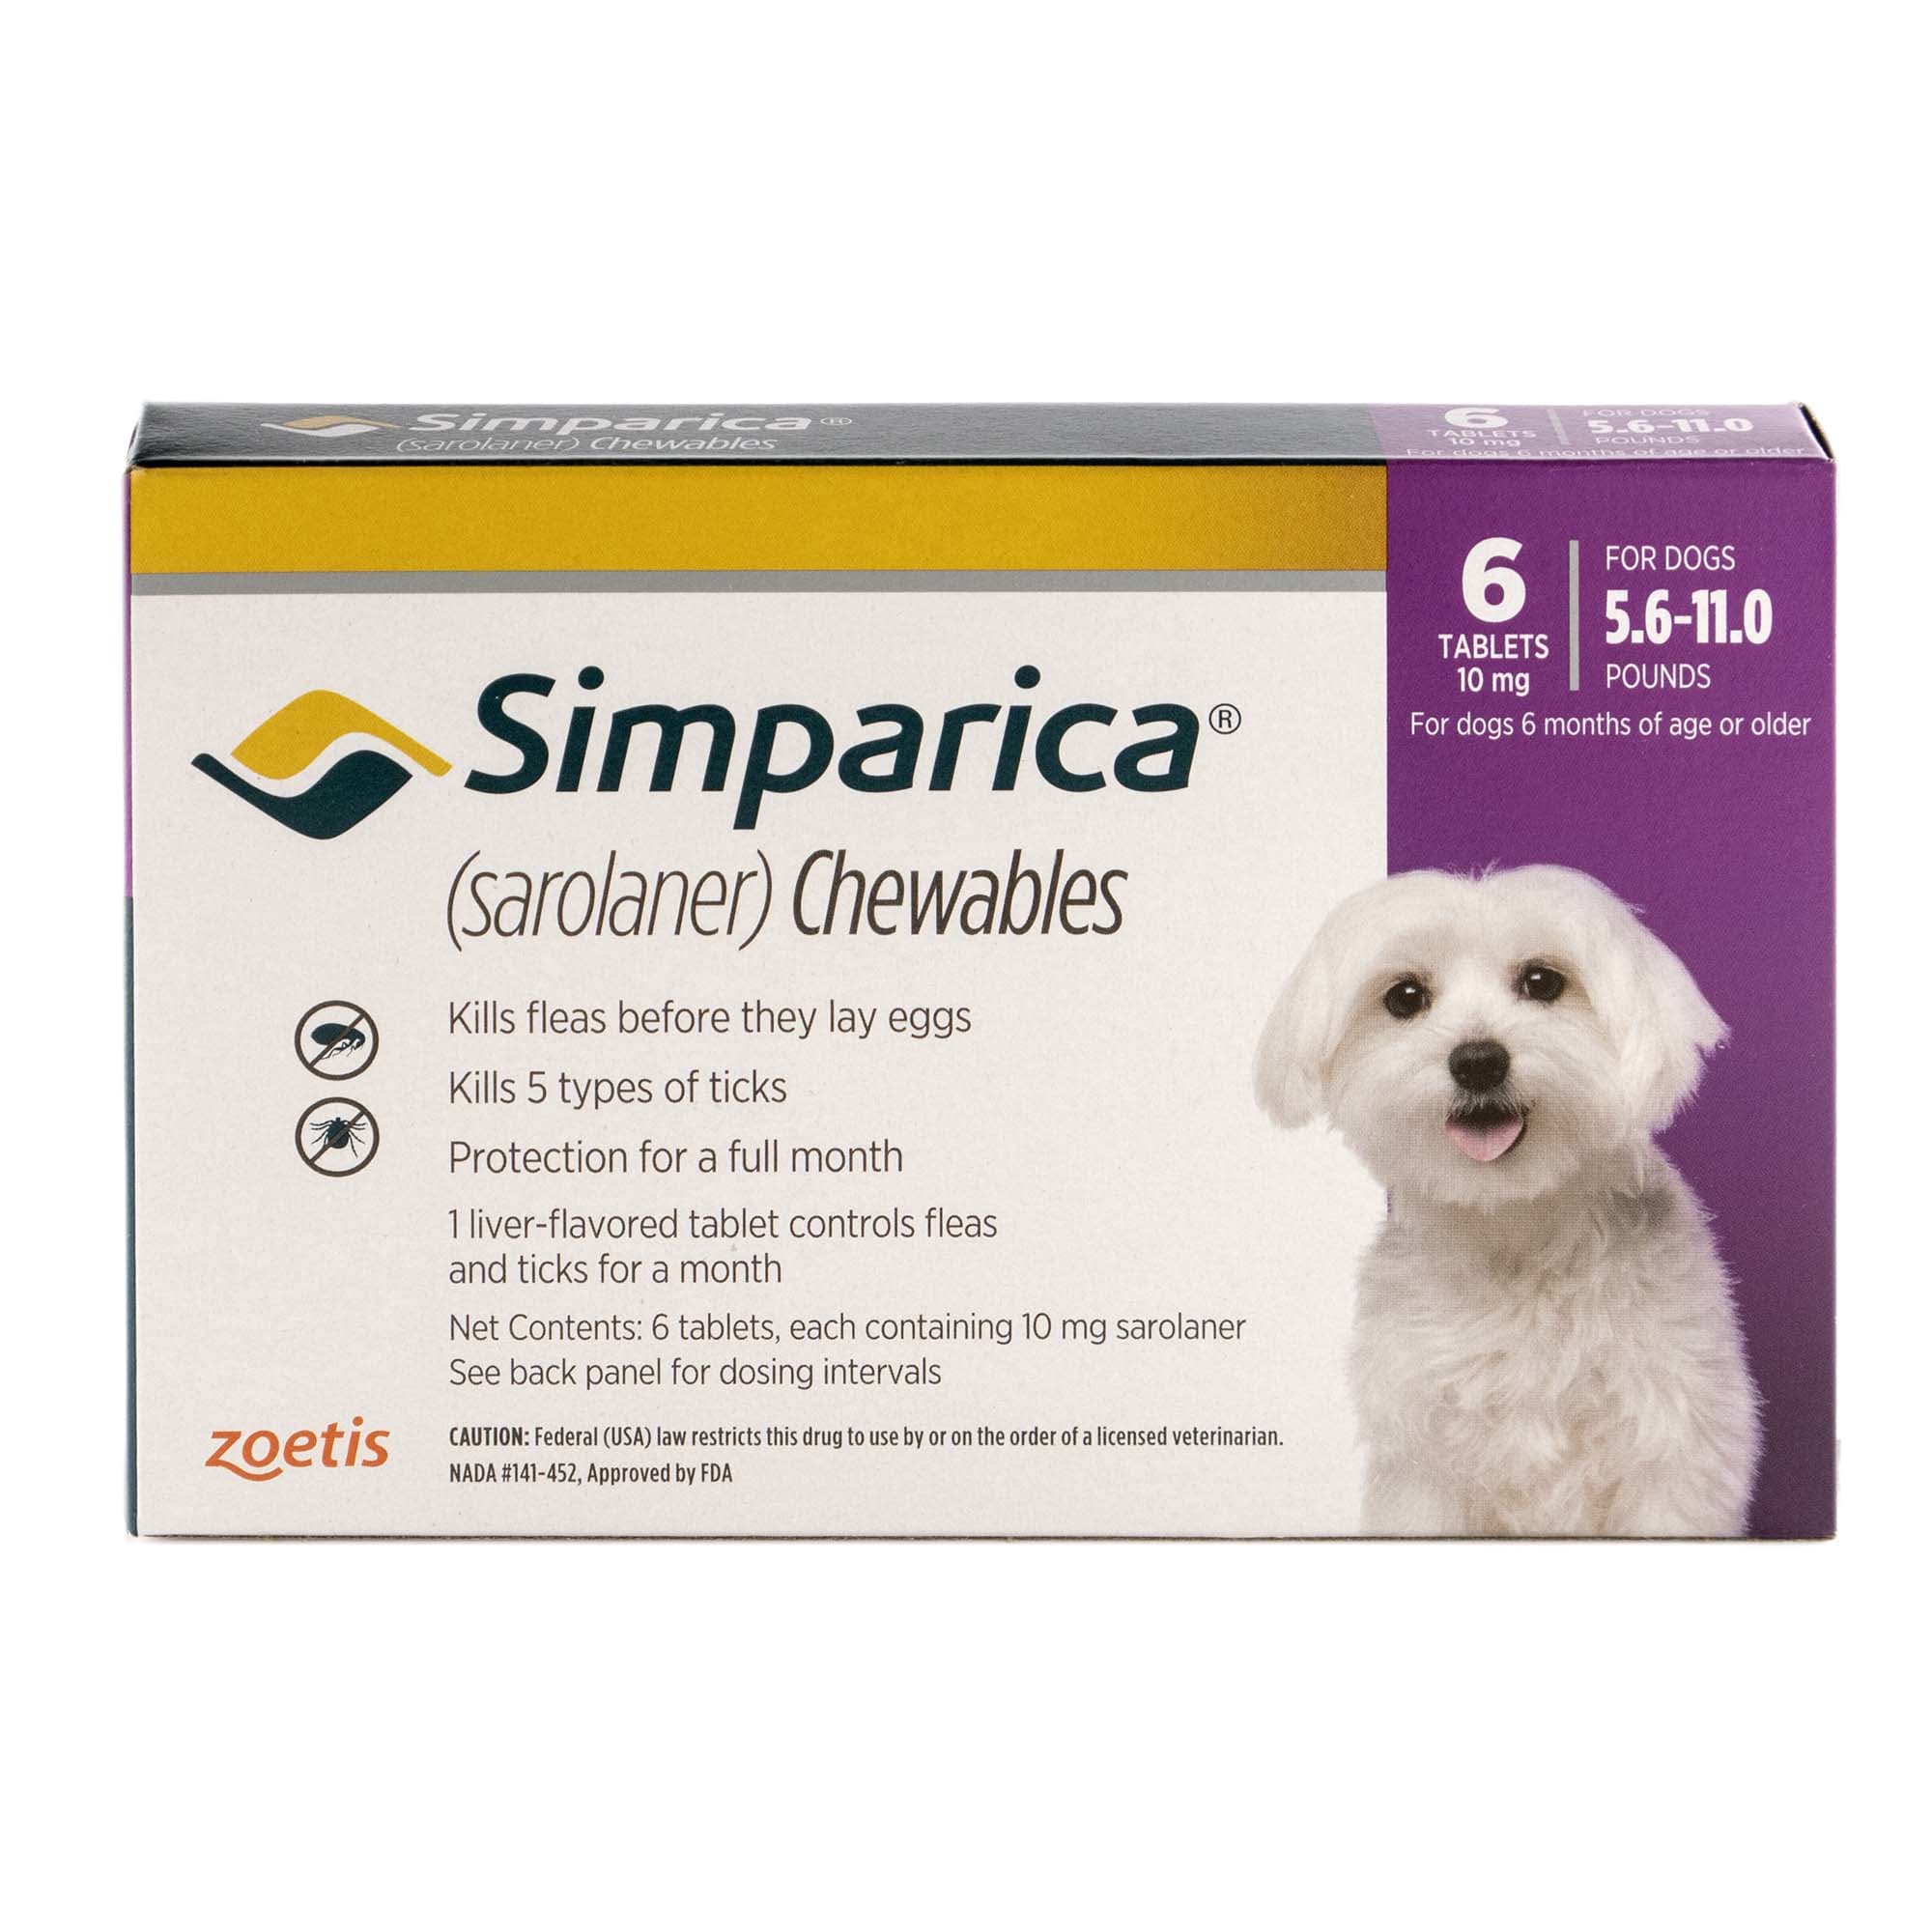 Up George Stevenson hole Simparica Chewable for Dogs 5.6-11 lbs, 3 Month Supply | Petco